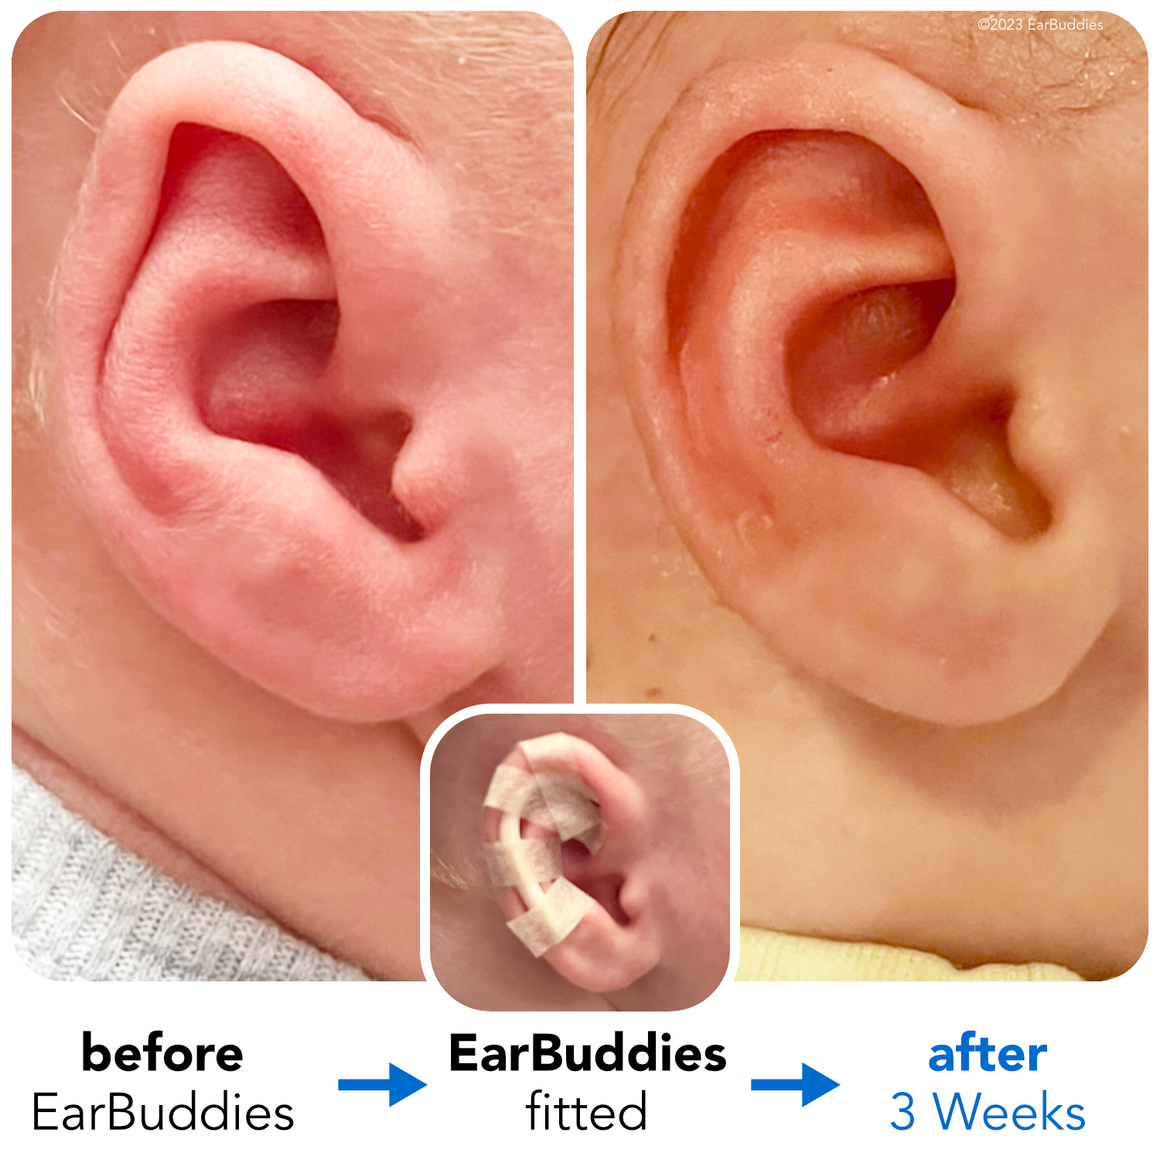 baby elfin ears, sharing my expereince using earbuddies(TM) on my baby